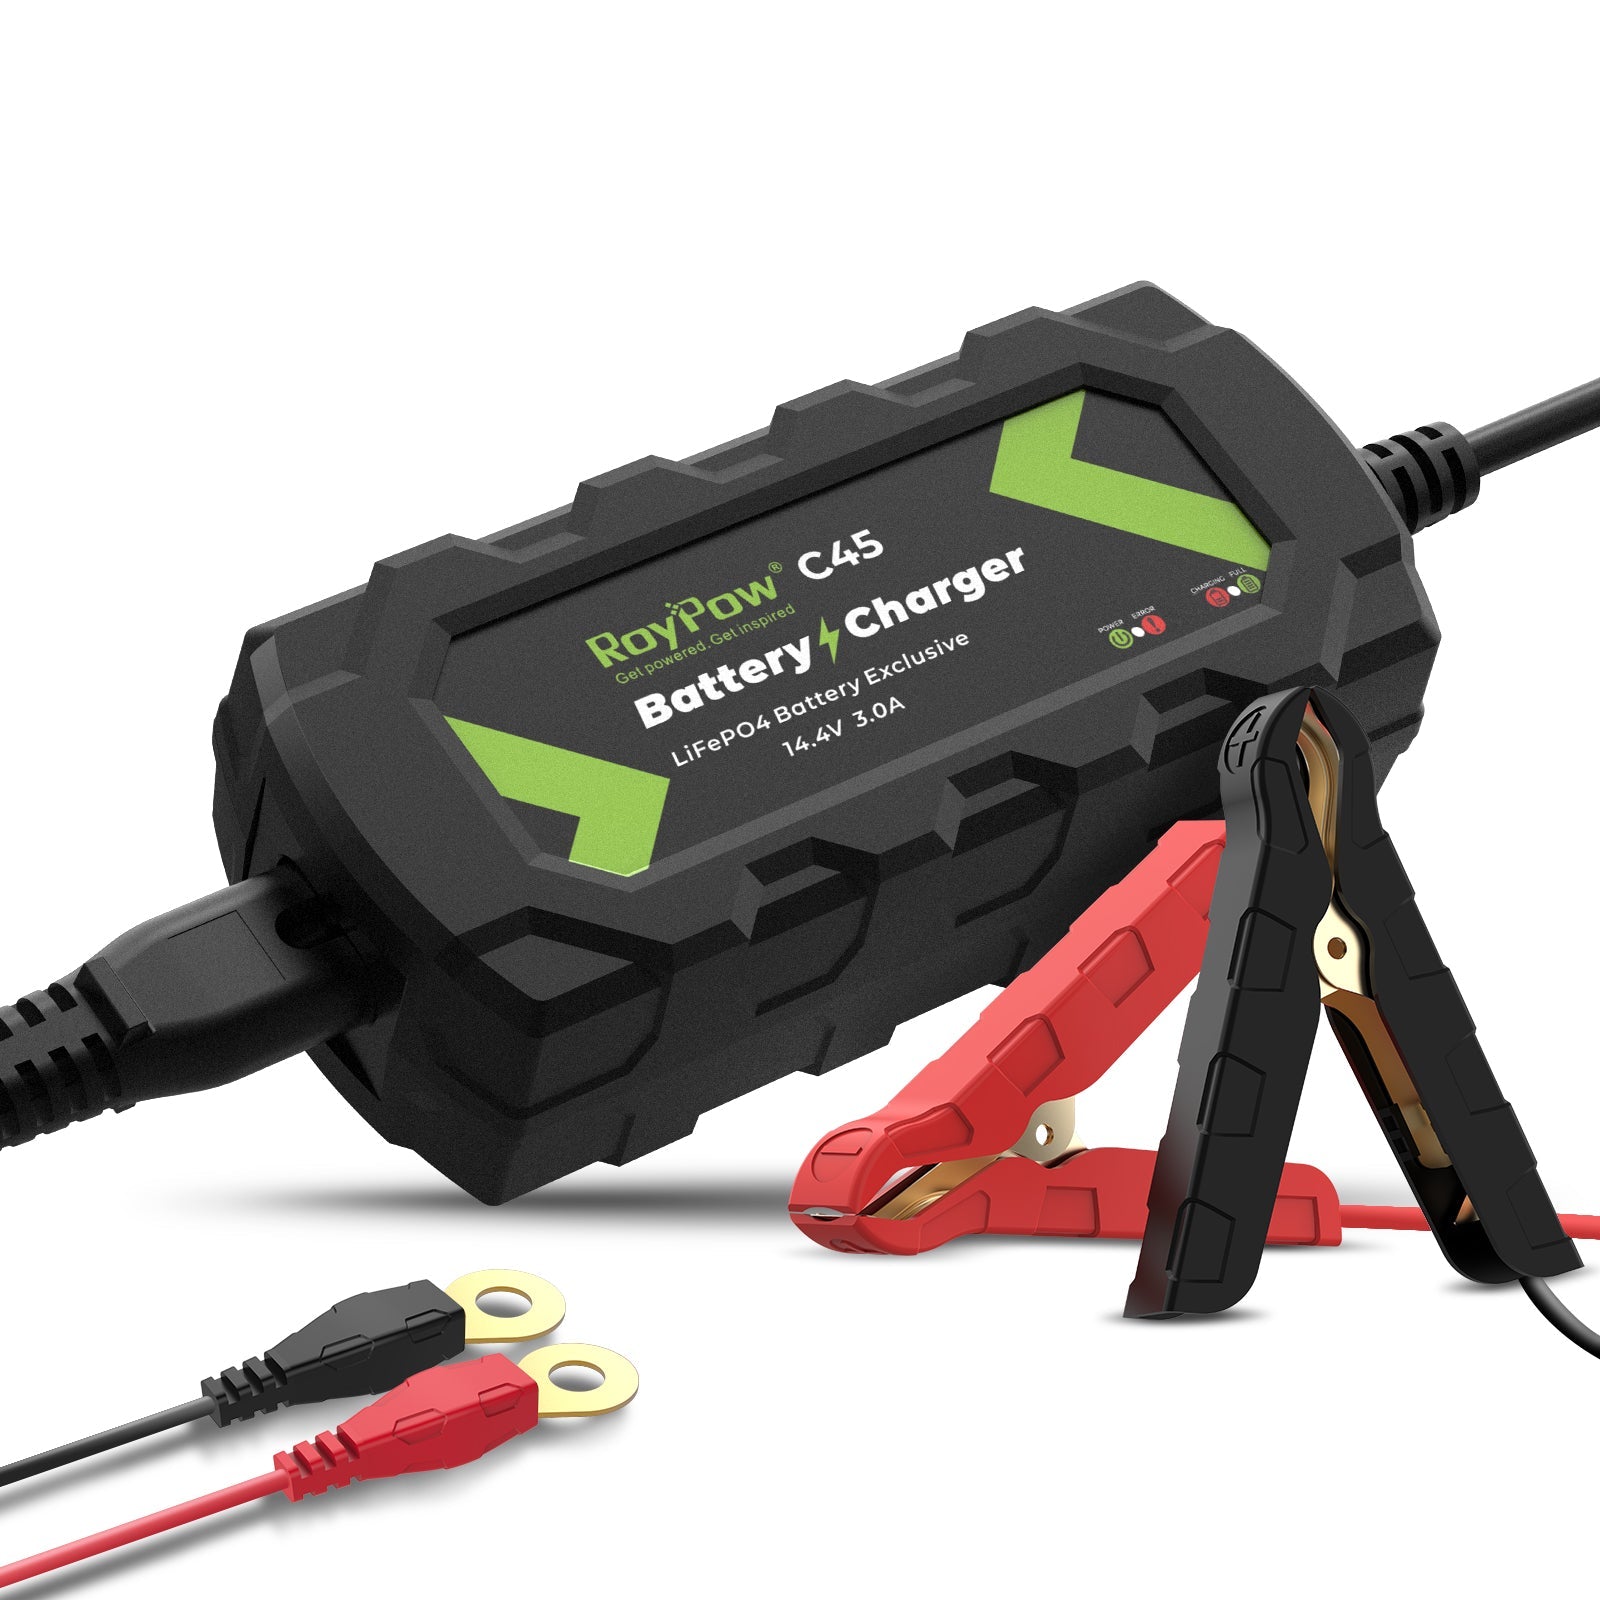 14.4V-3A C45 LiFePO4 Battery charger